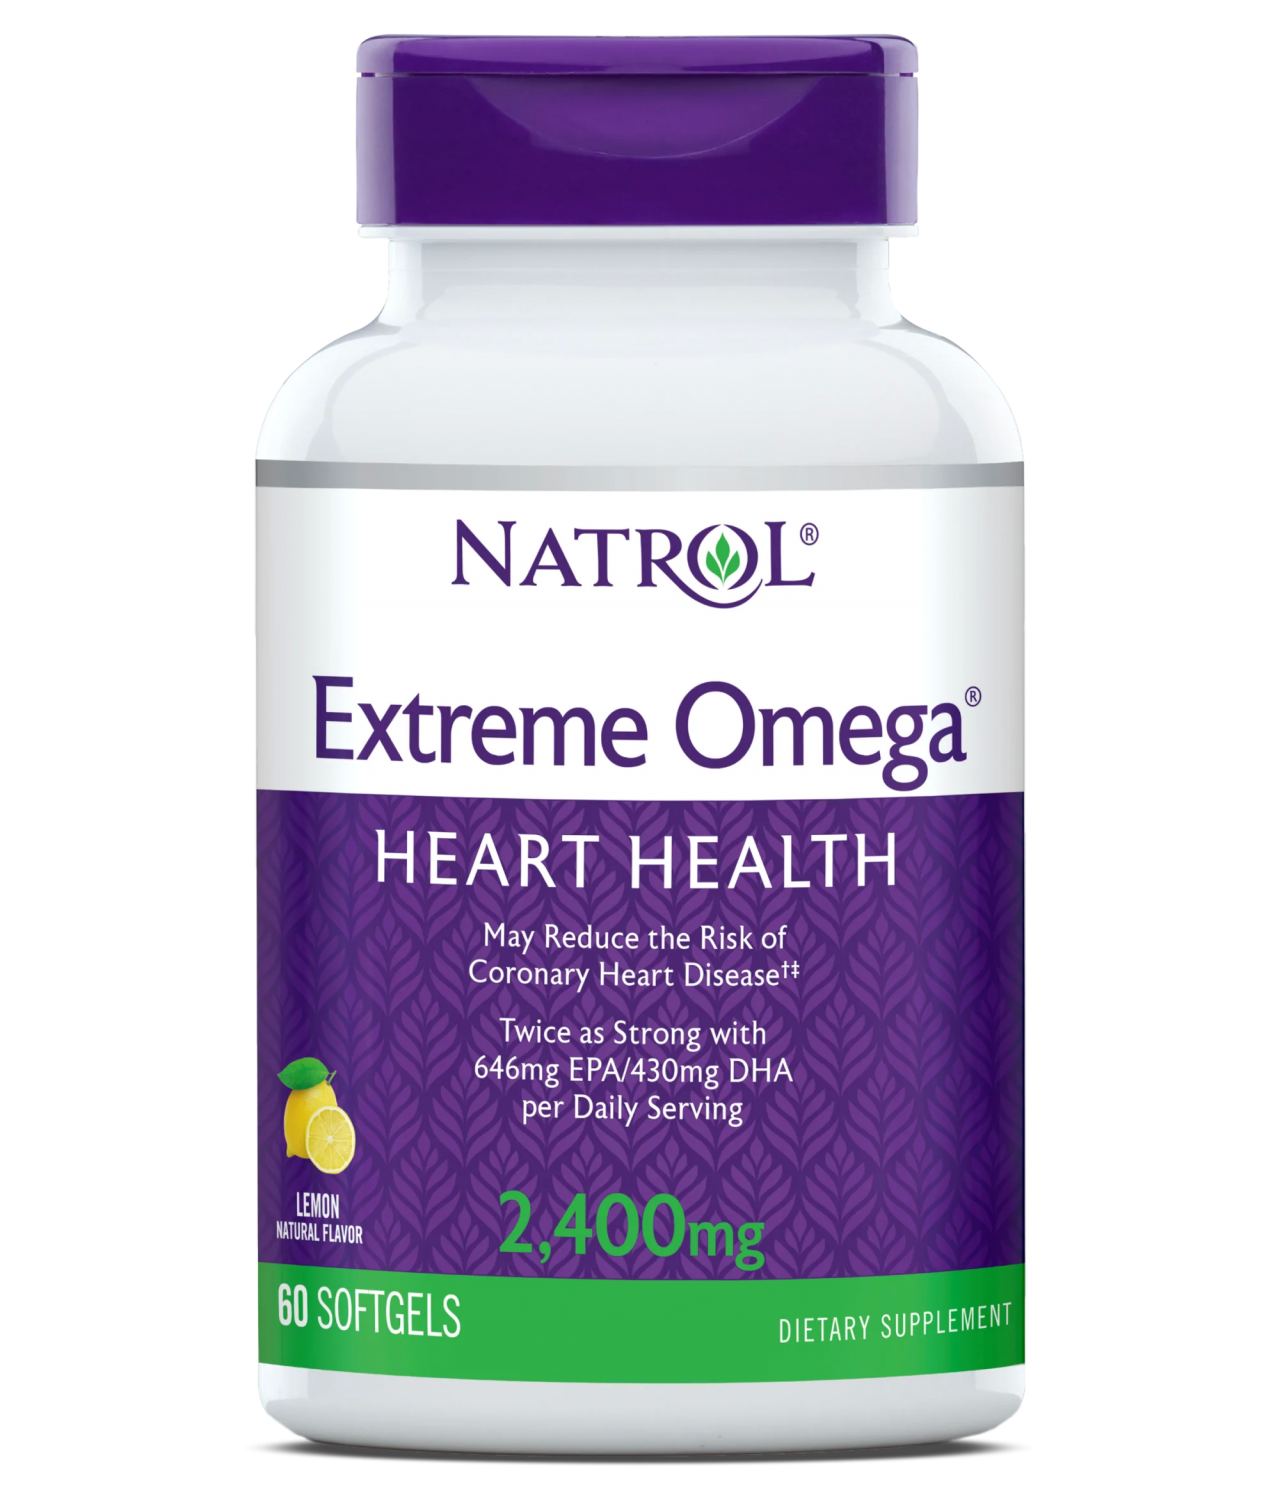 Natrol Extreme Omega 2400 Мг, 60 Капсул